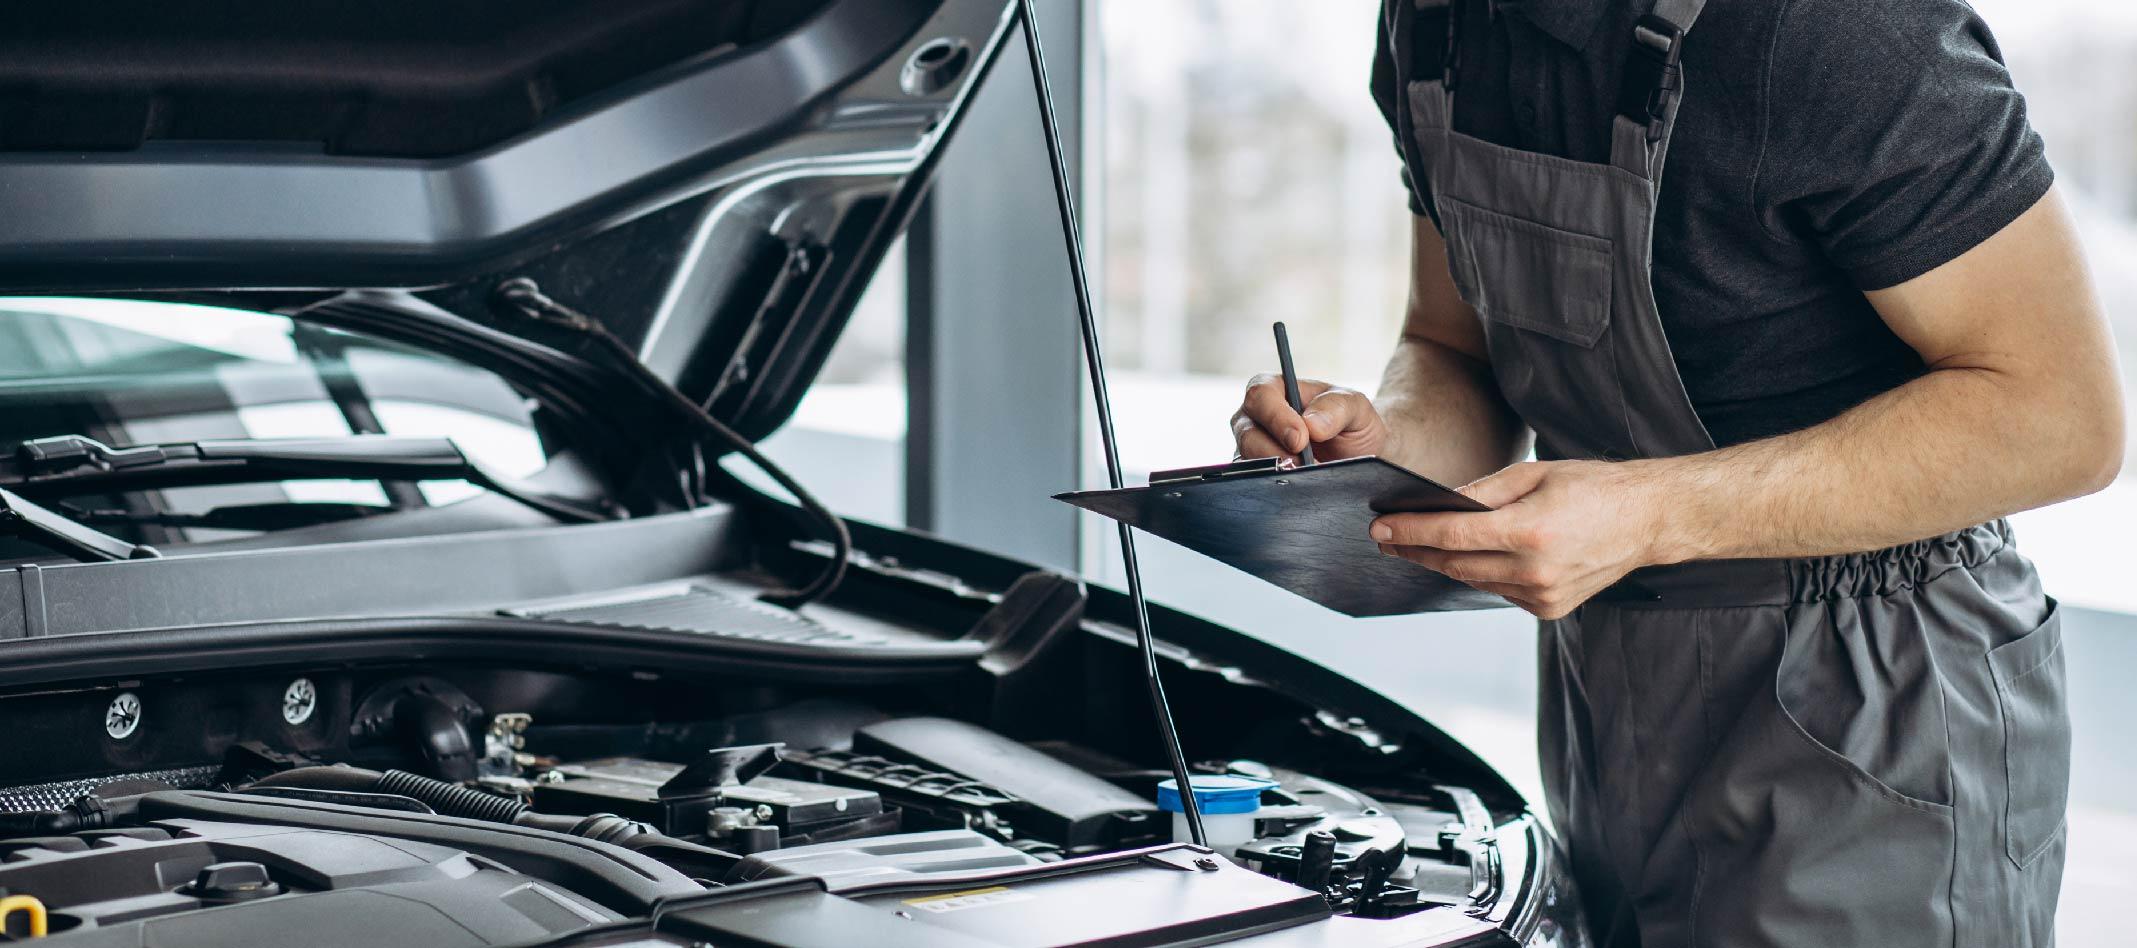 Do I need an MOT? The importance of servicing a car